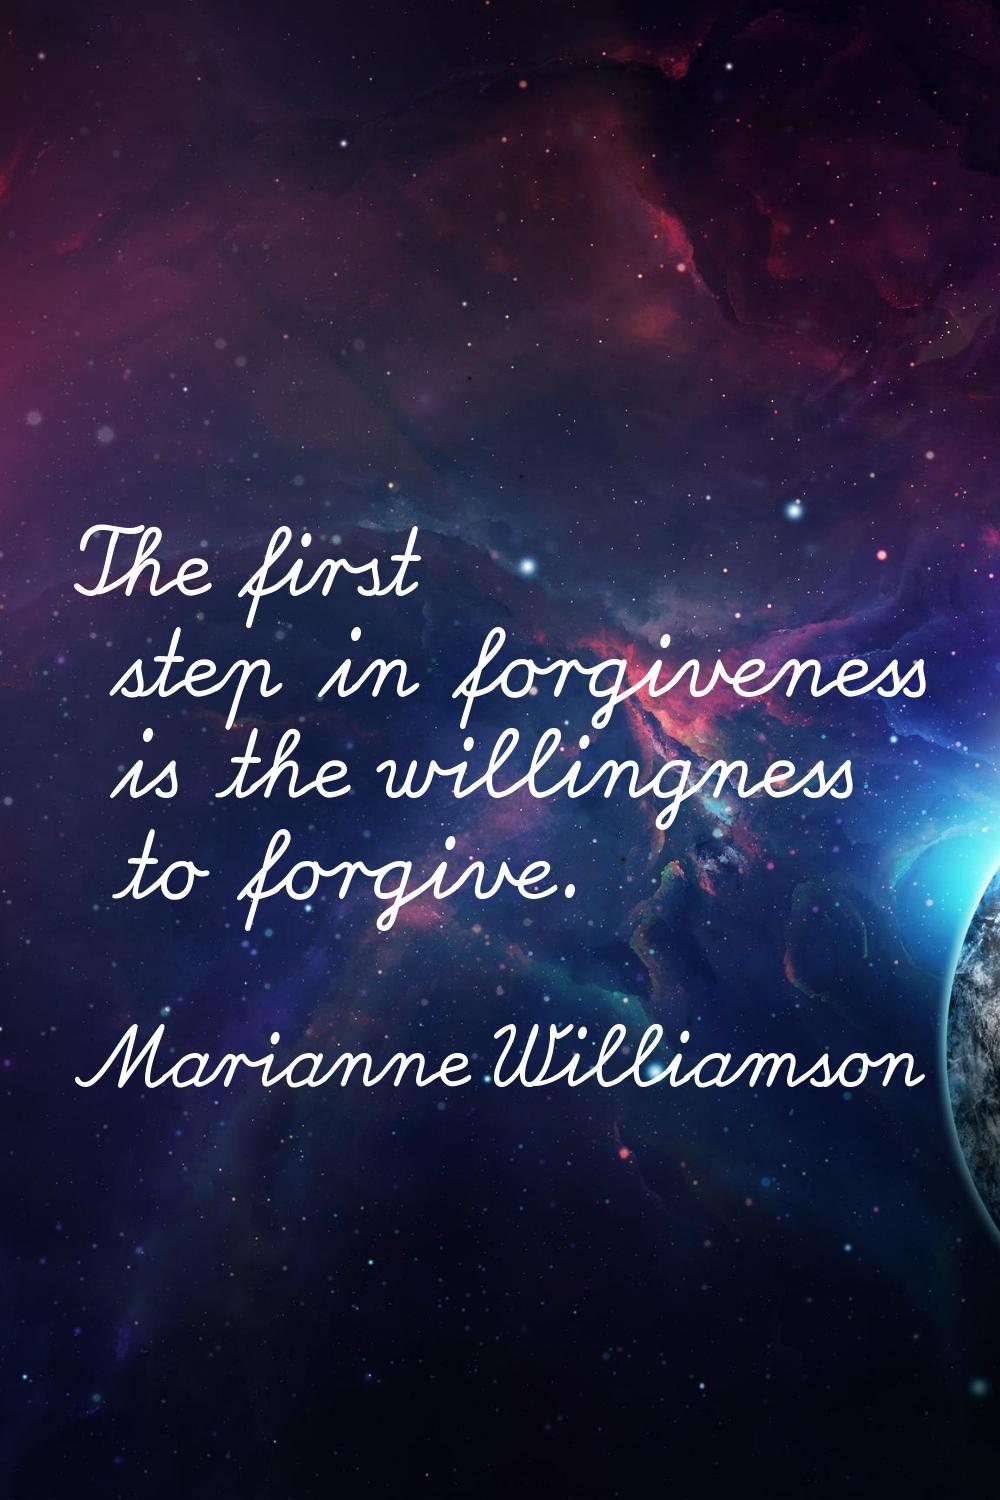 The first step in forgiveness is the willingness to forgive.